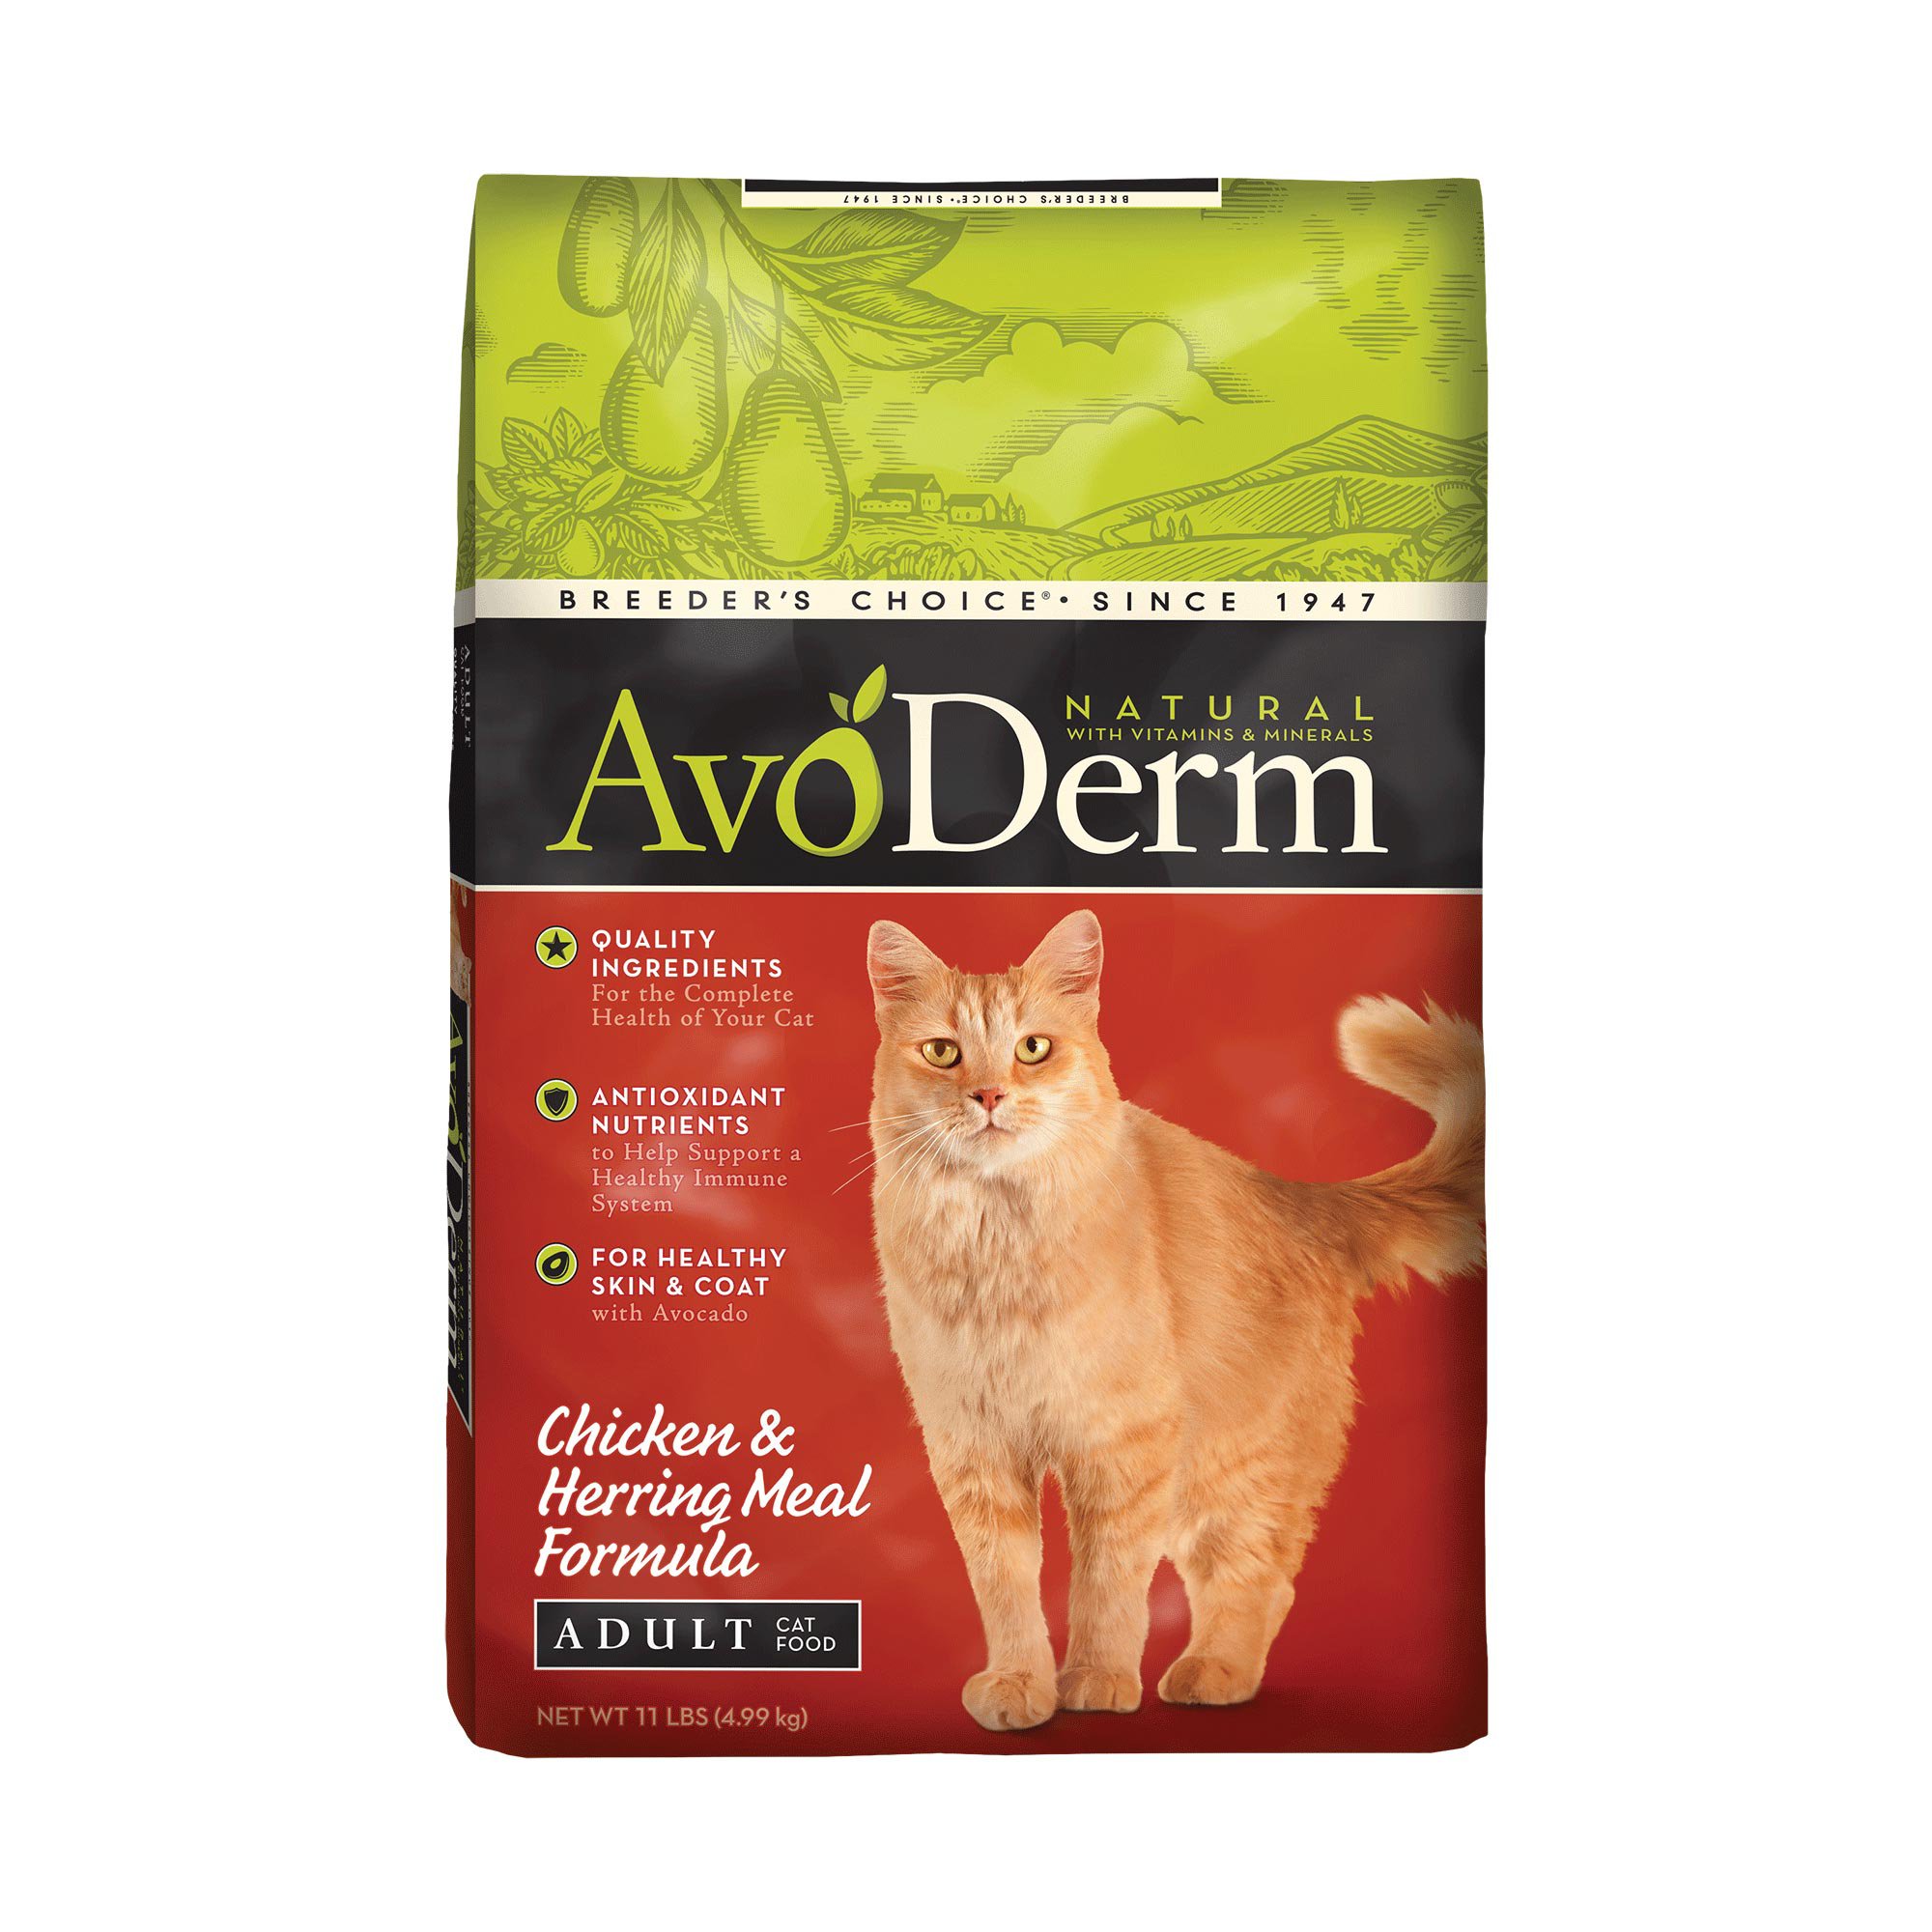 Avoderm Natural Chicken & Herring Meal Formula Dry Cat Food, 11-Pound 